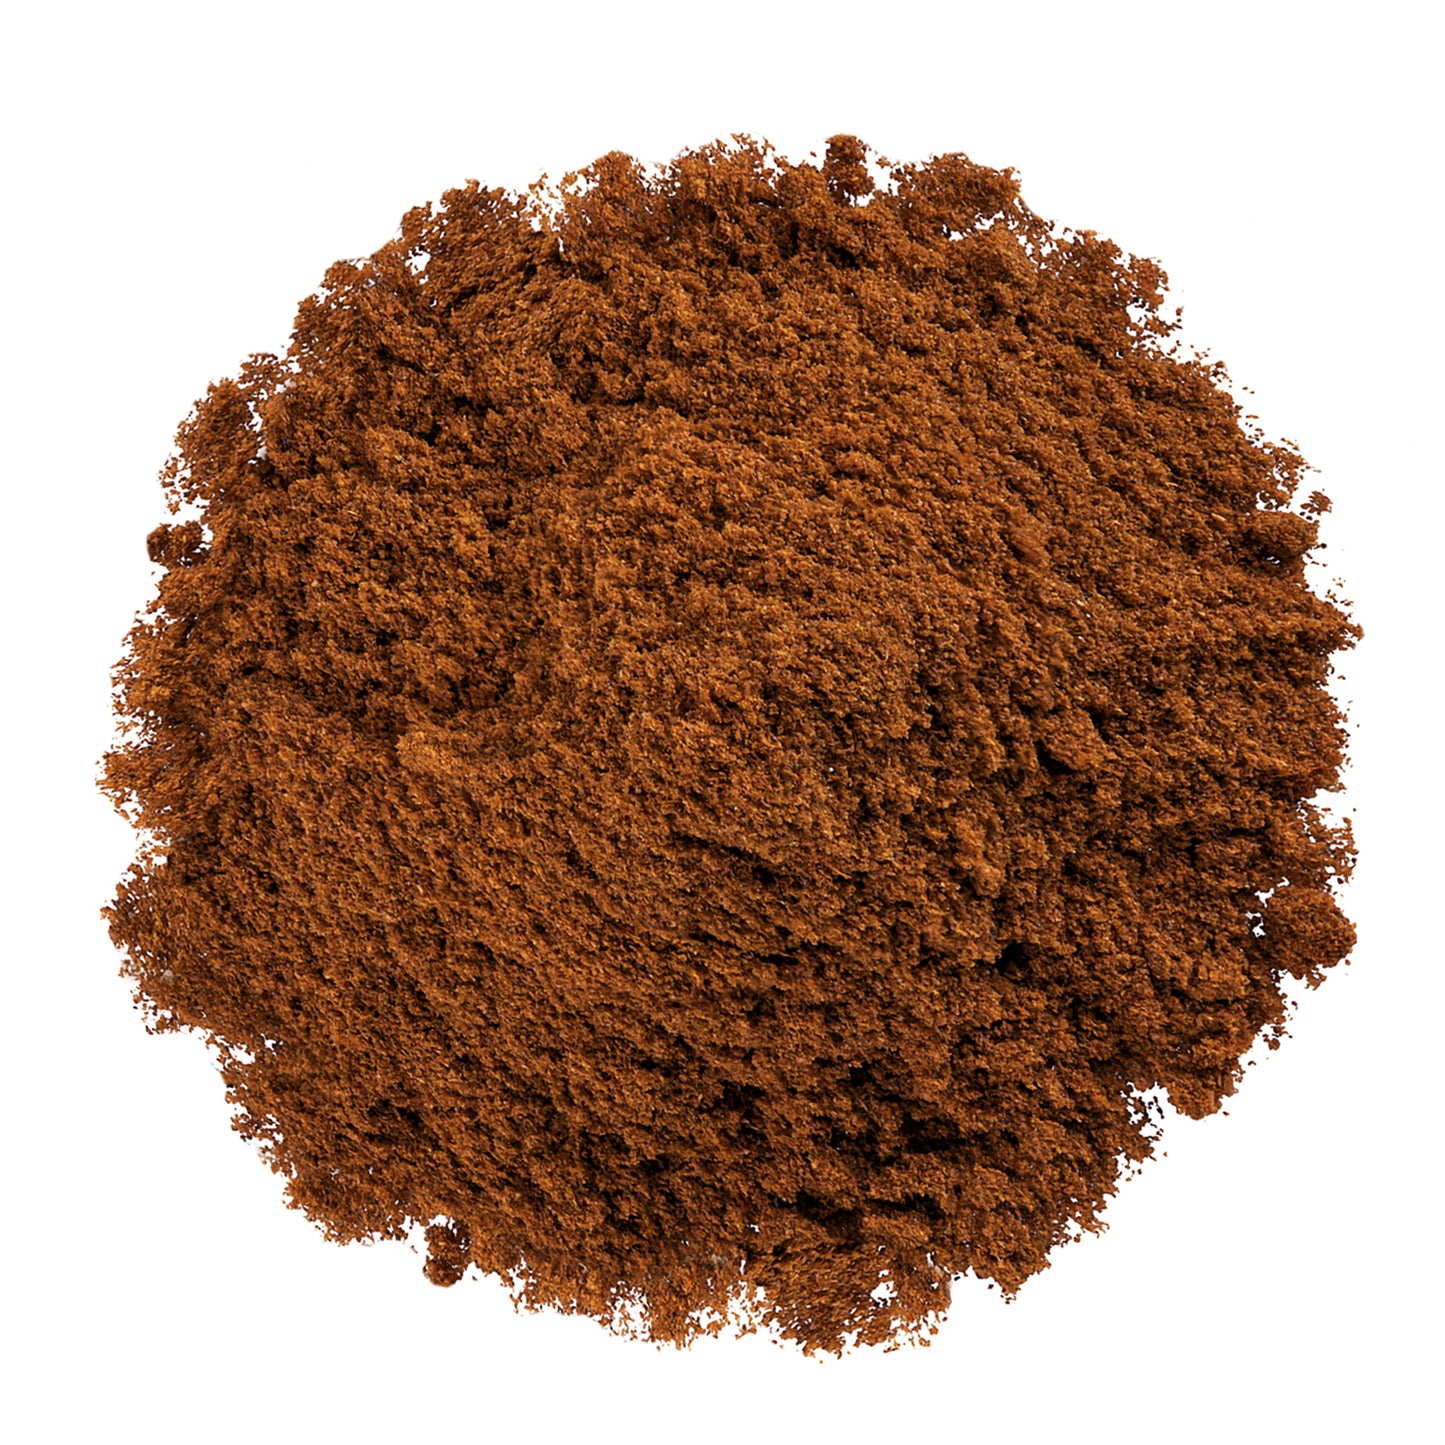 Clove Powder – Finely Ground Clove Pods, Pure, Vegan, Bulk Spice. Good Source of Vitamin K and Iron. Great for Hot Beverages, Pickles, Curries, and Spice Blends